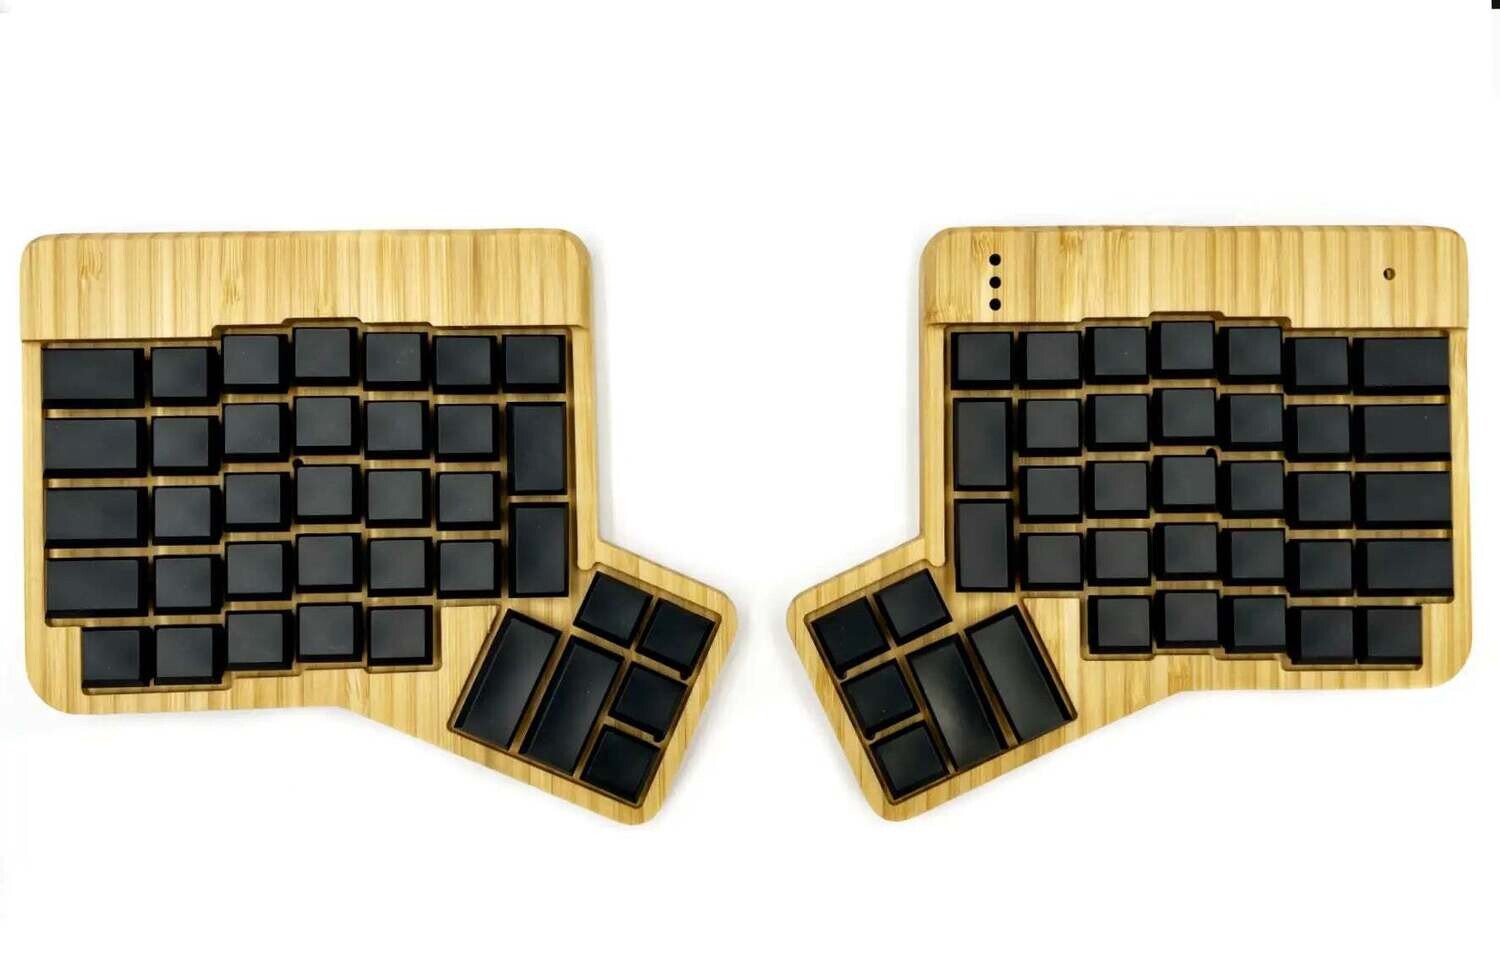 Black Low profile chocolate Keycaps Pack for ErgoDox_FT Low Profile